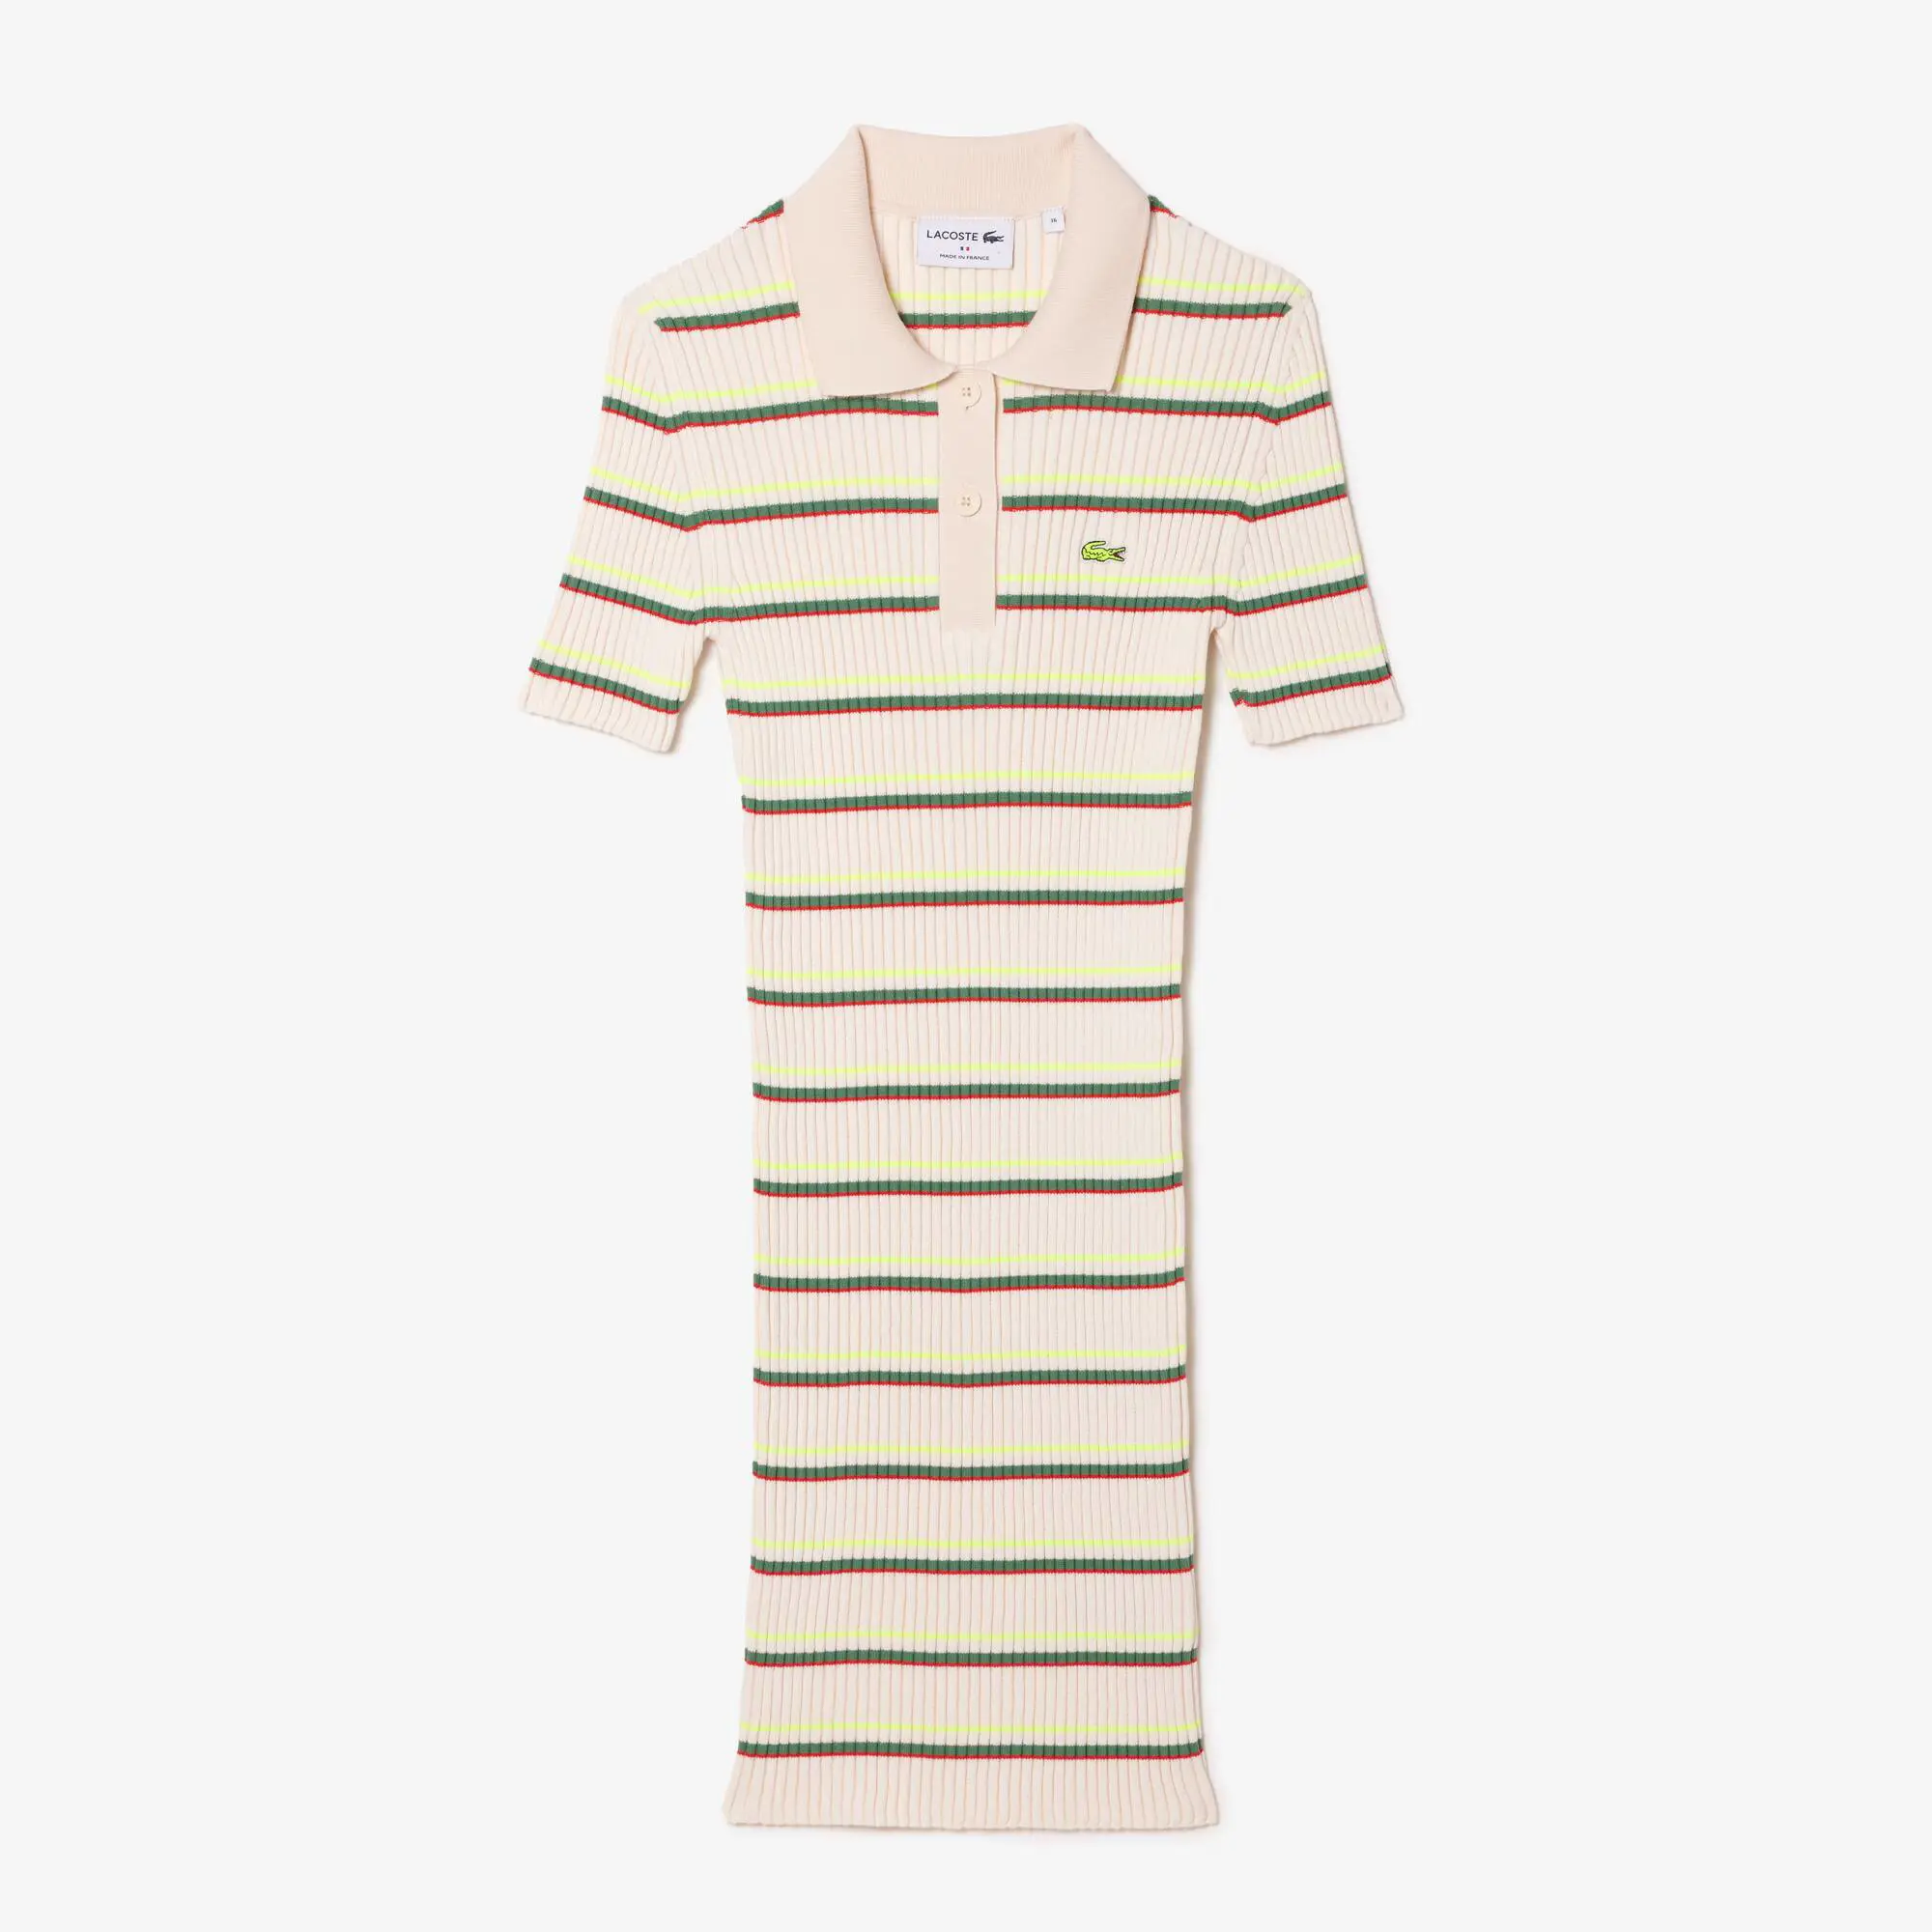 Lacoste Women’s Lacoste French Made Striped Polo Dress. 2